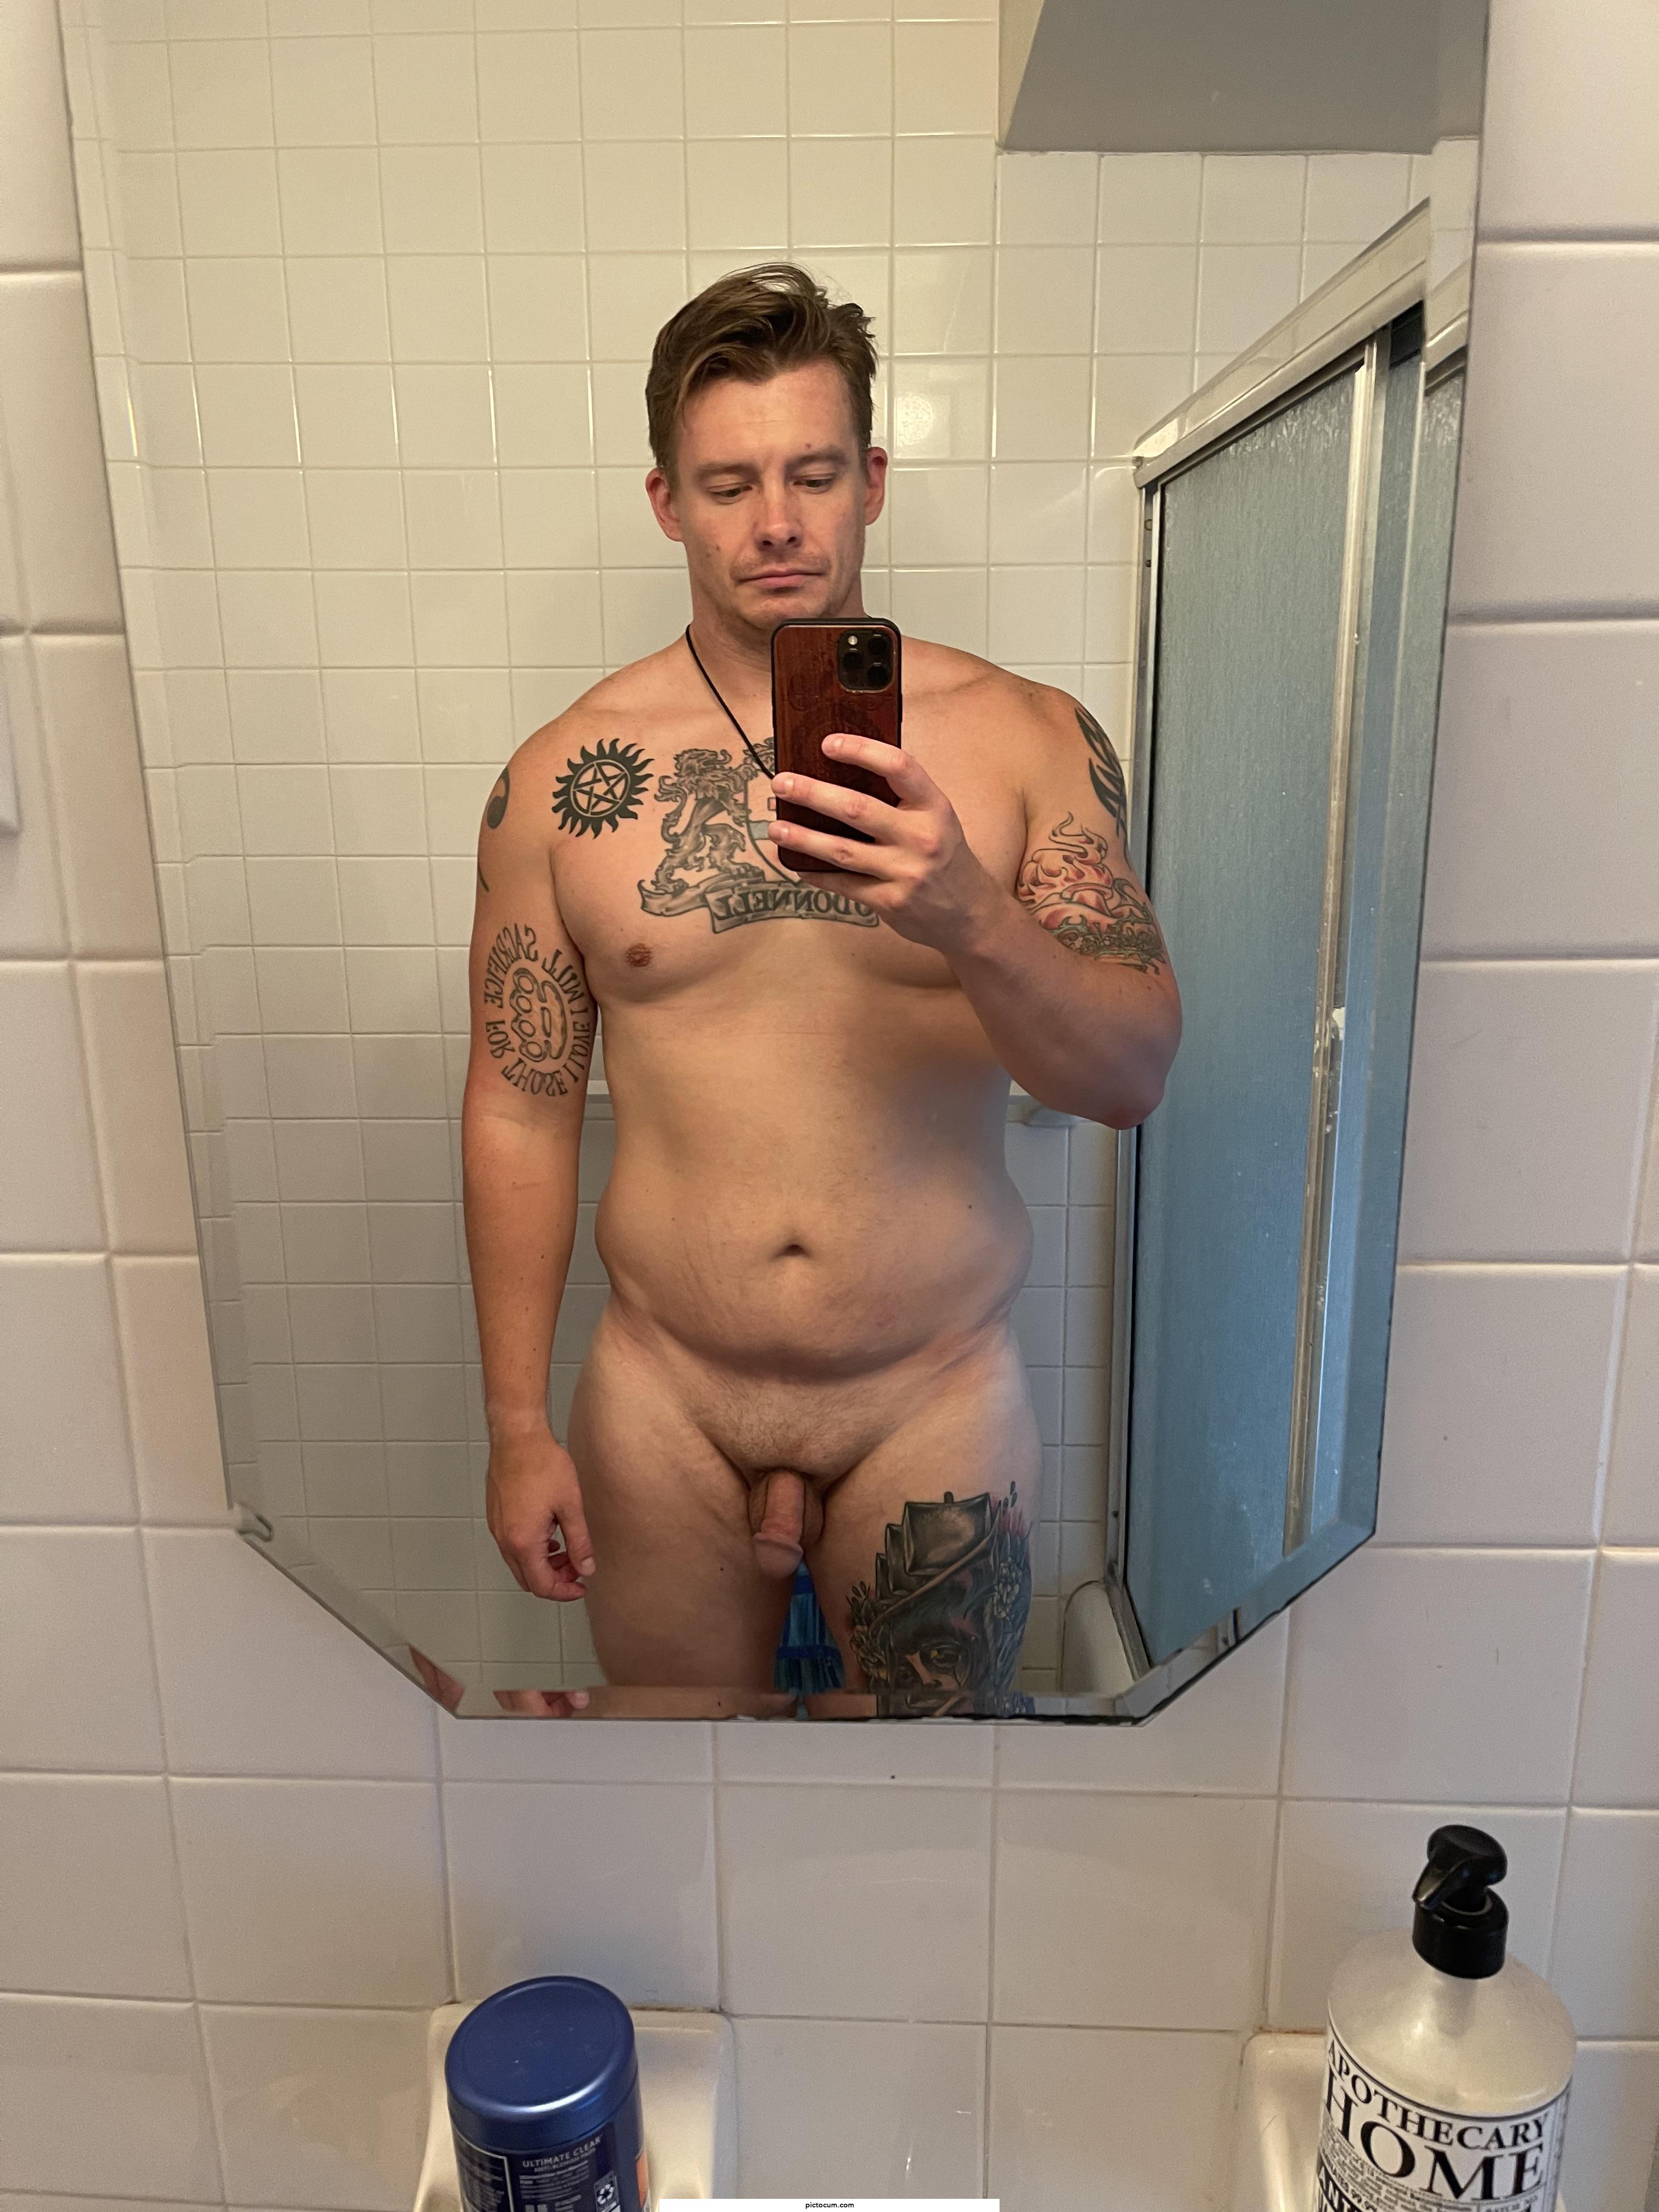 36m, 230lbs, 6ft after gaining a few lbs due to life, trying to work my ass off to get back to where I was